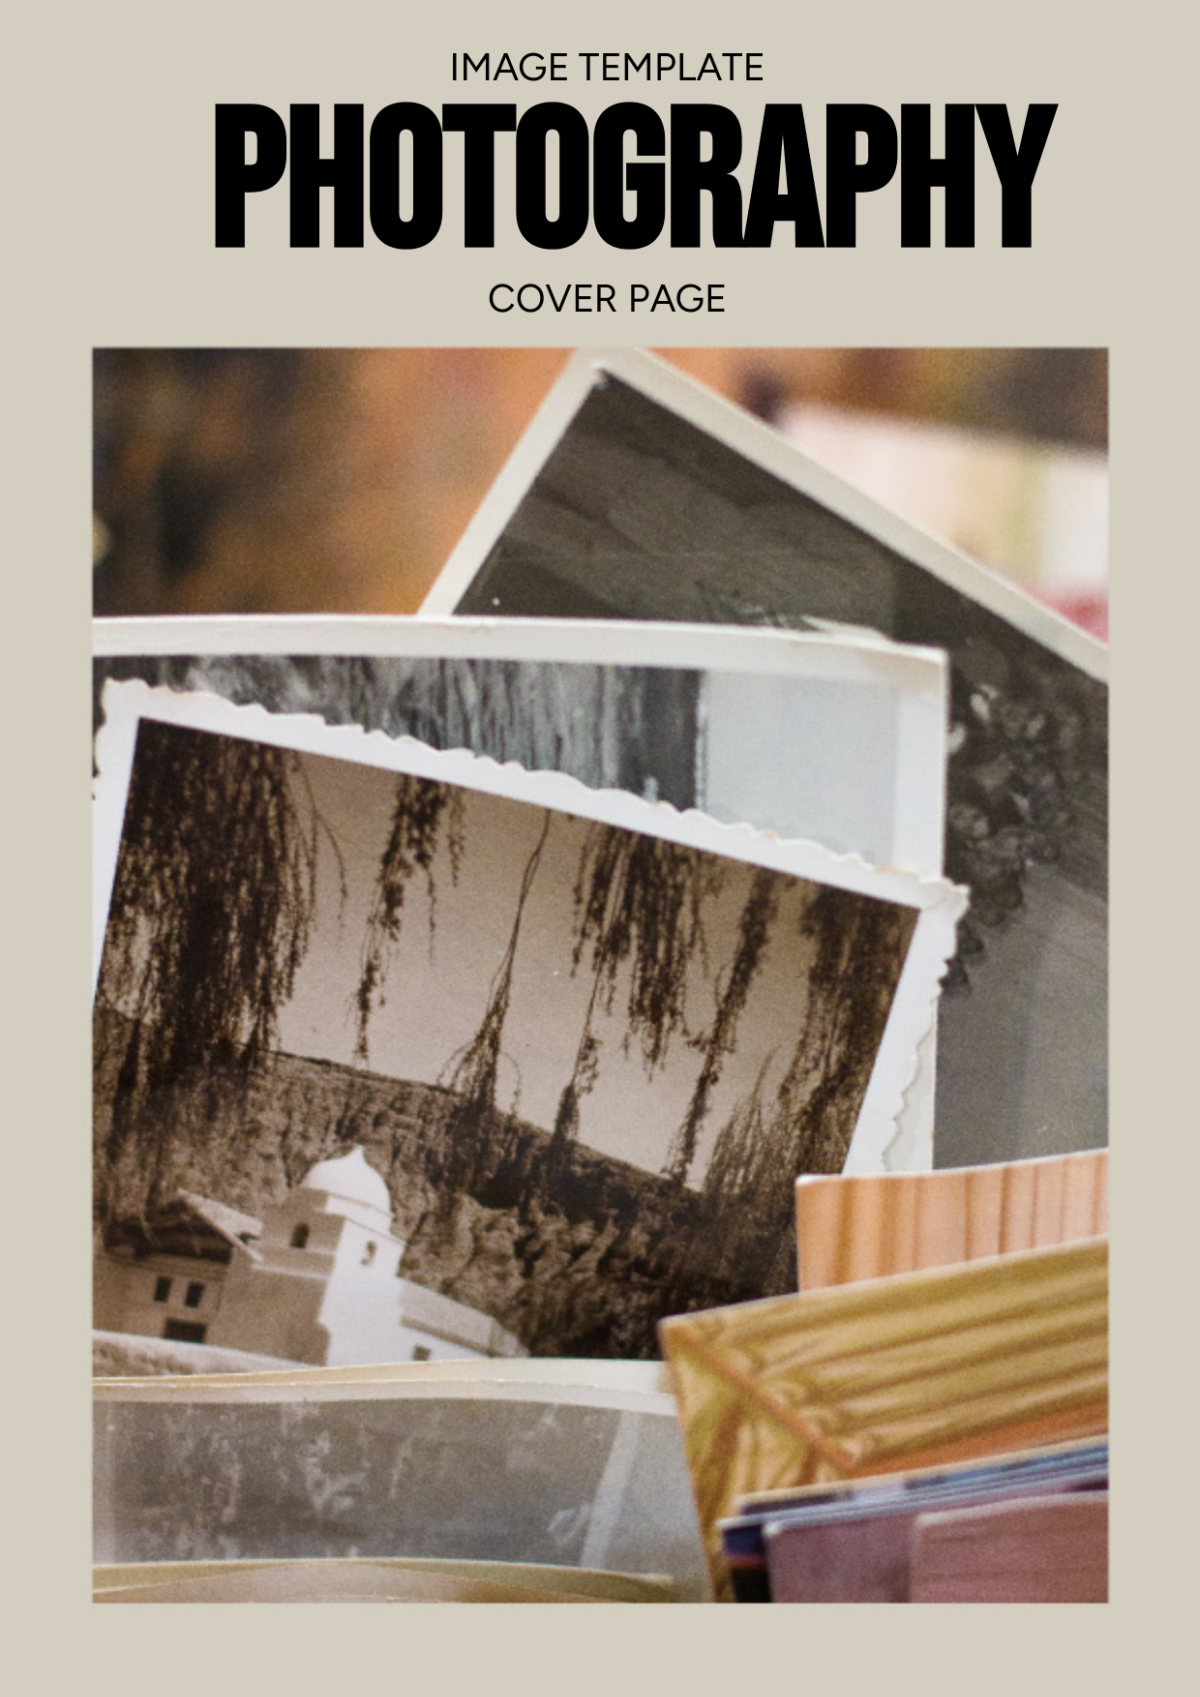 Free Photography Cover Page Image Template